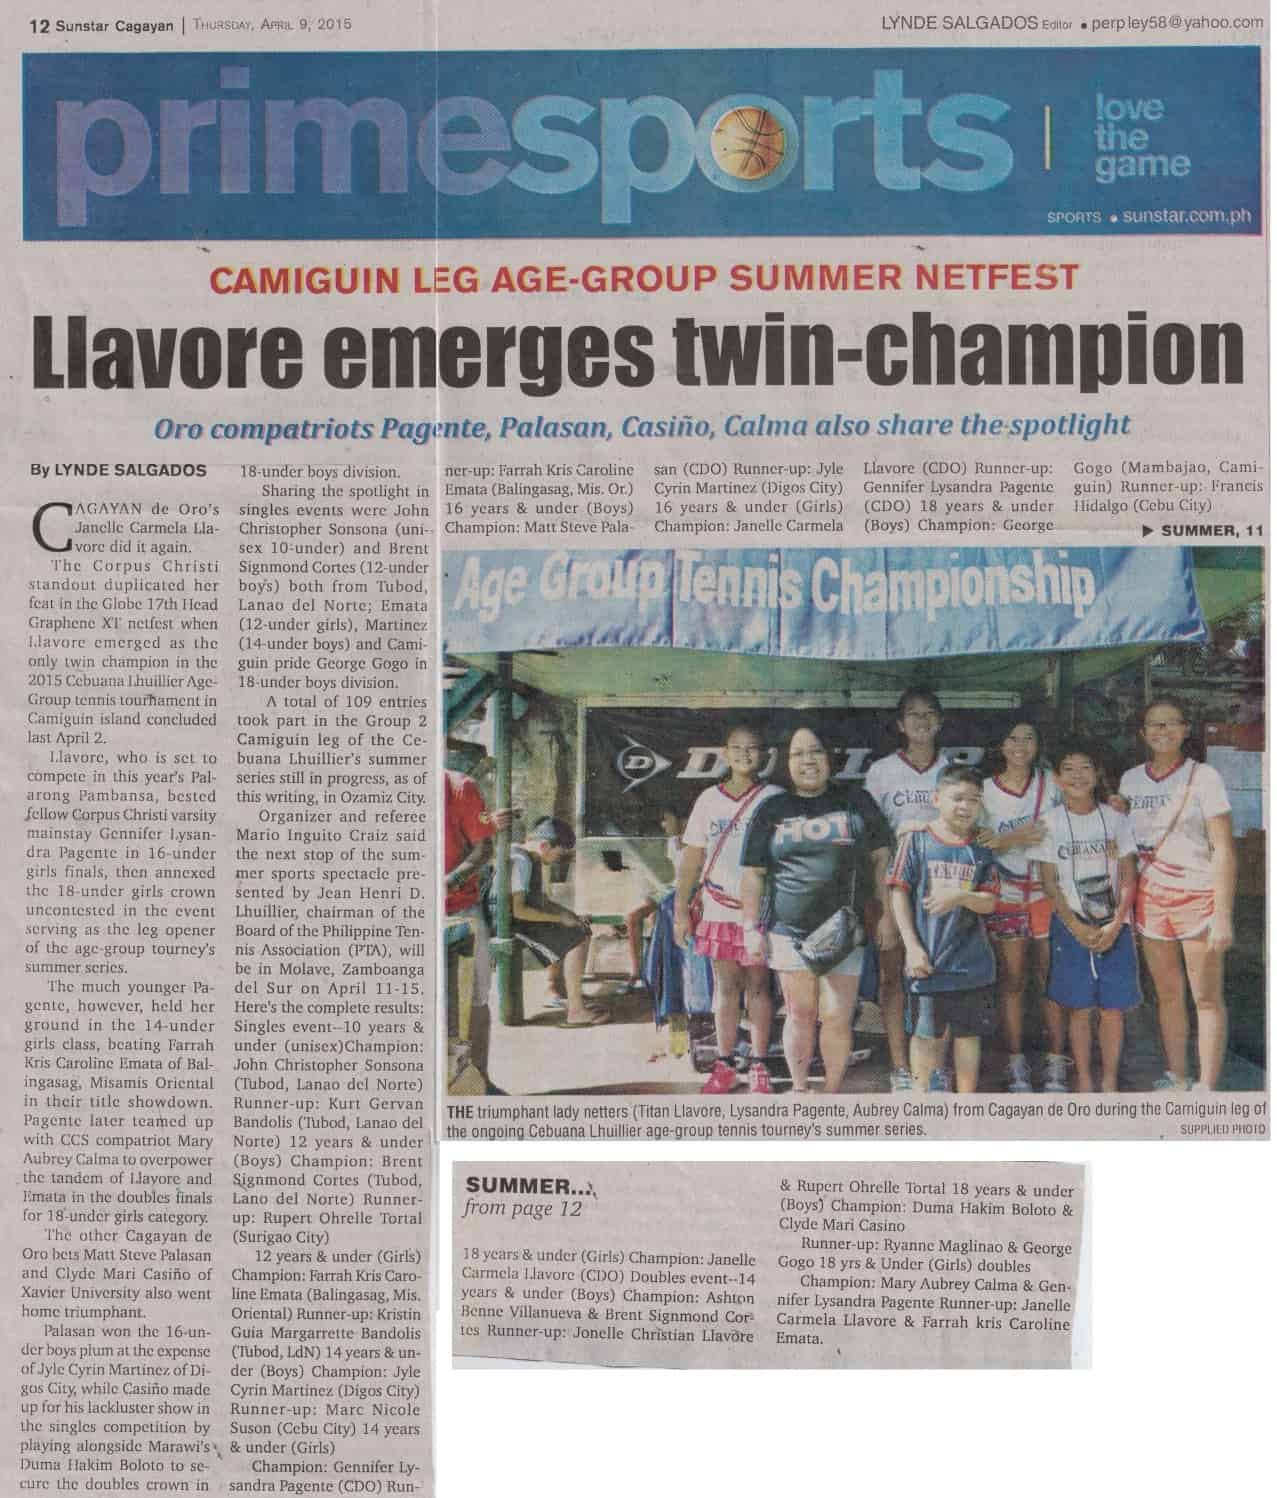 Llavore emerges twin-champion